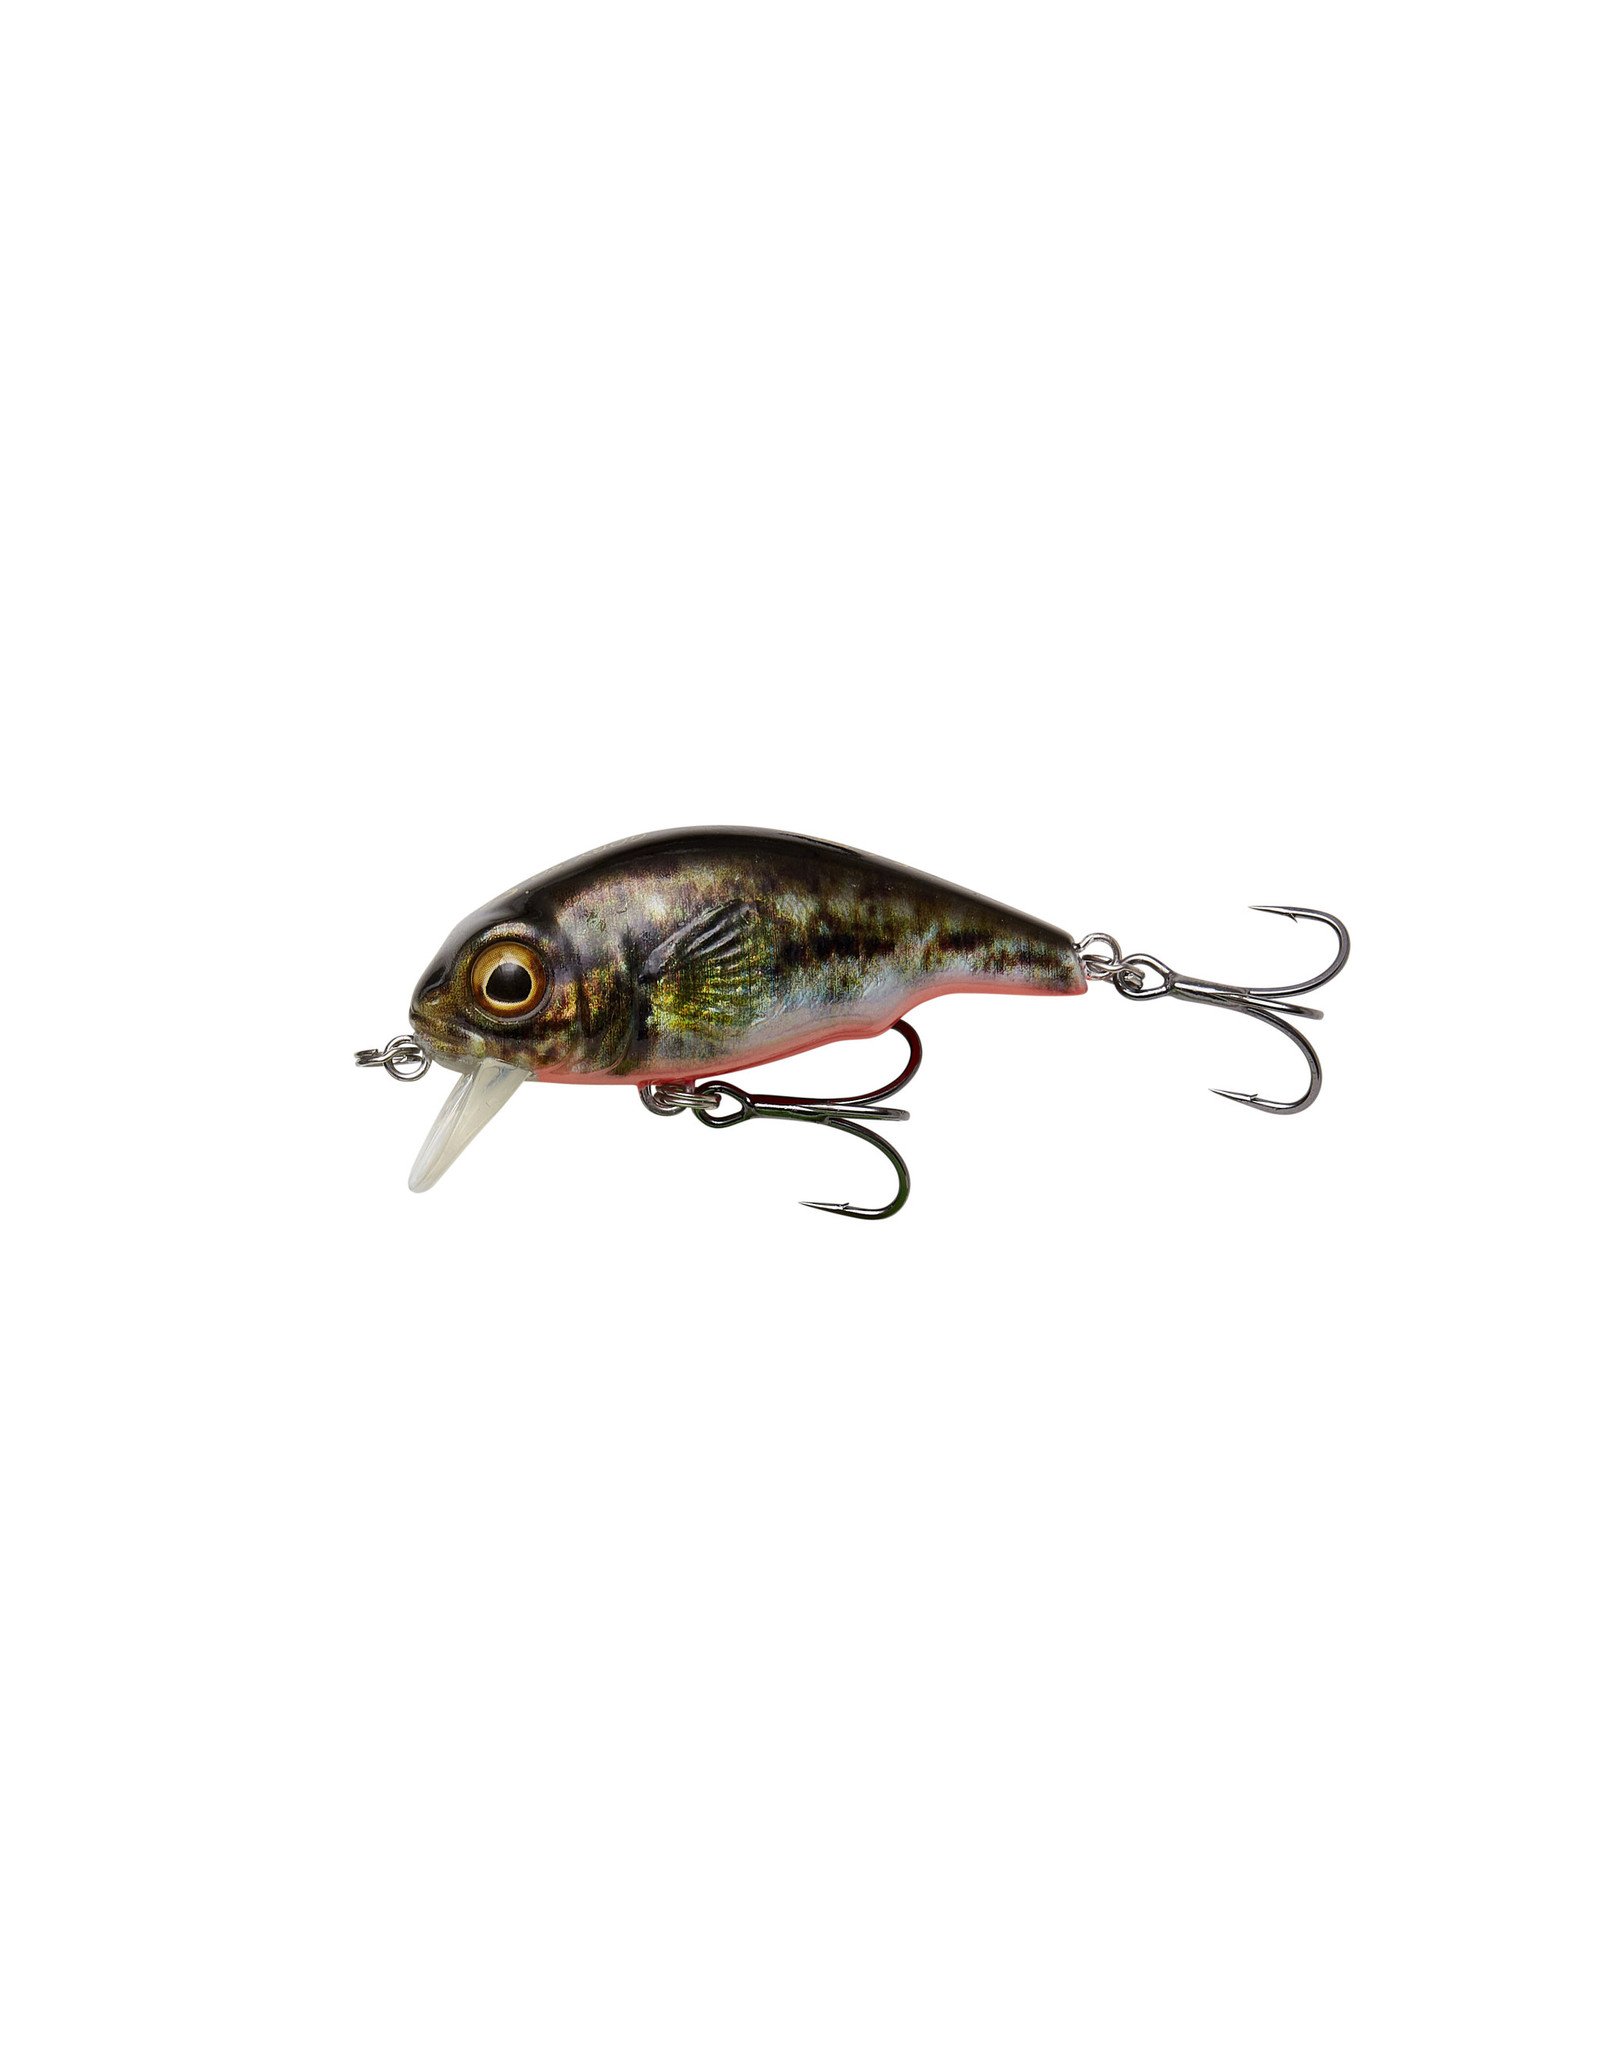 Savage Gear 3D GOBY CRANK SR 5CM 6.5G FLOATING UV RED AND BLACK